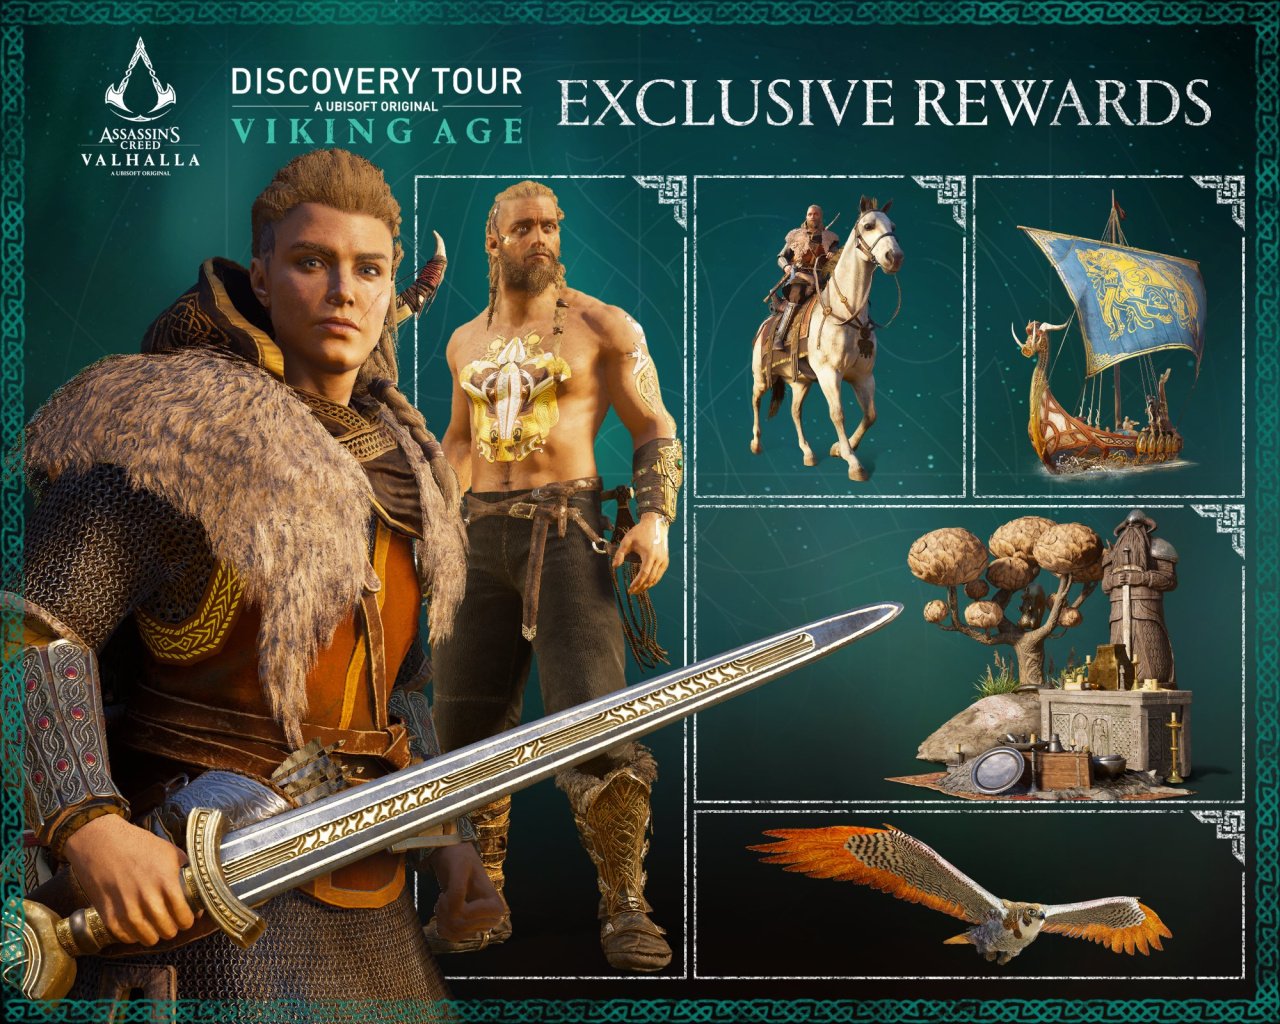 Assassin S Creed Valhalla Viking Age Discovery Tour Is Out Now On Ps